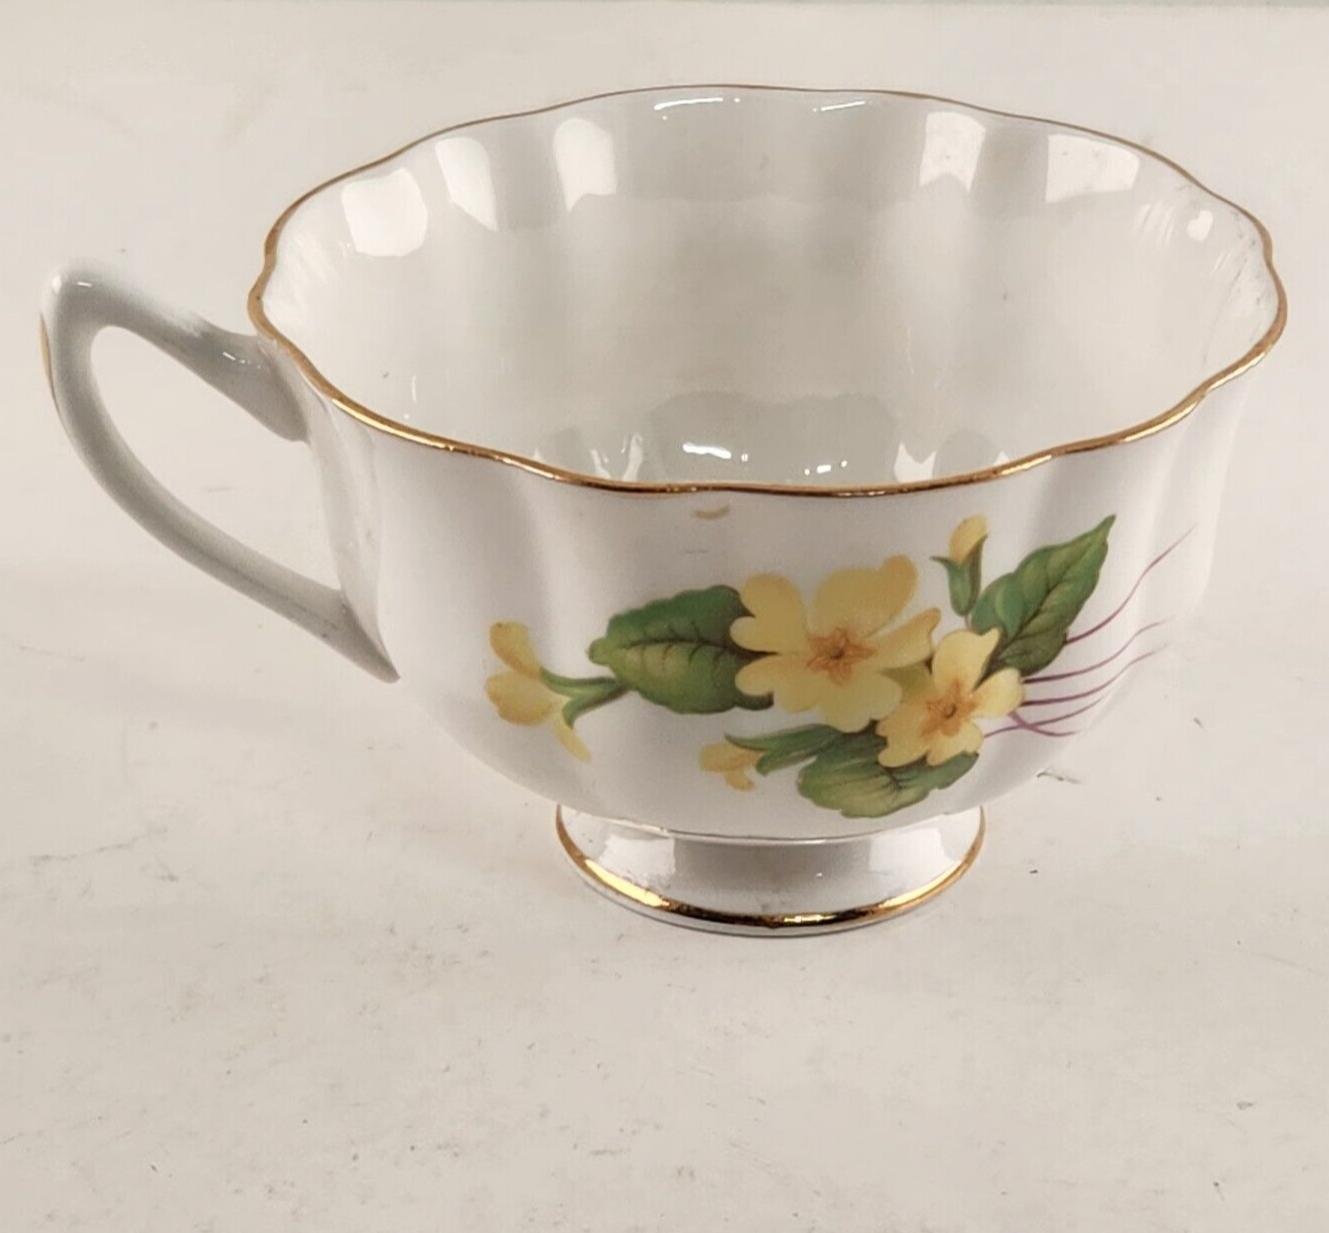 Shelley Primrose Teacup England Fine Bone China Yellow Cup Only Porcelain Yellow